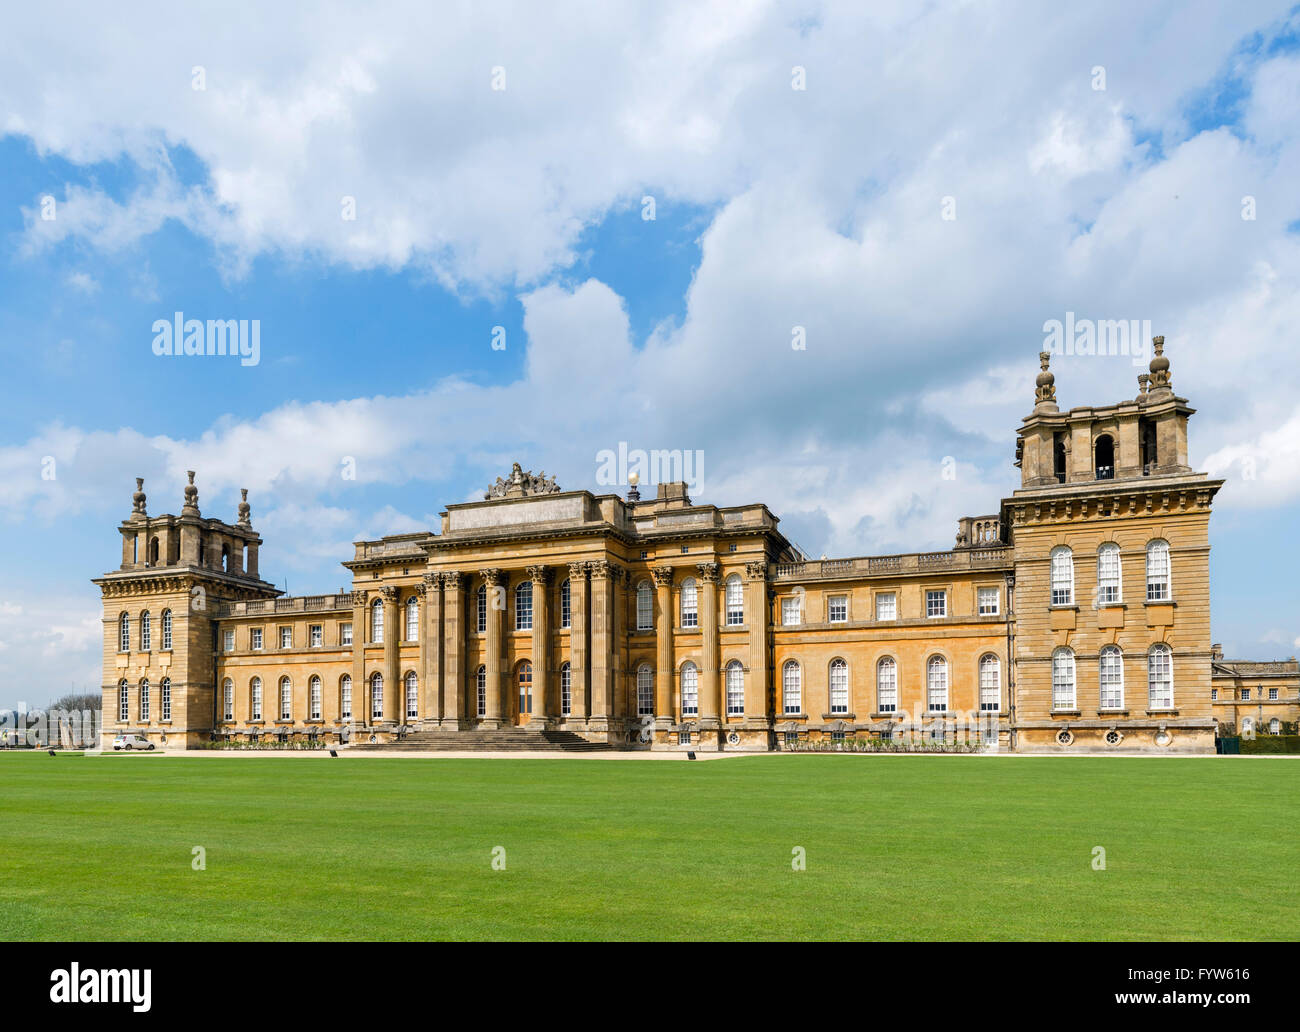 Rear of Blenheim Palace, seat of the Dukes of Marlborough and birthplace of Sir Winston Churchill, Woodstock, Oxfordshire, UK Stock Photo